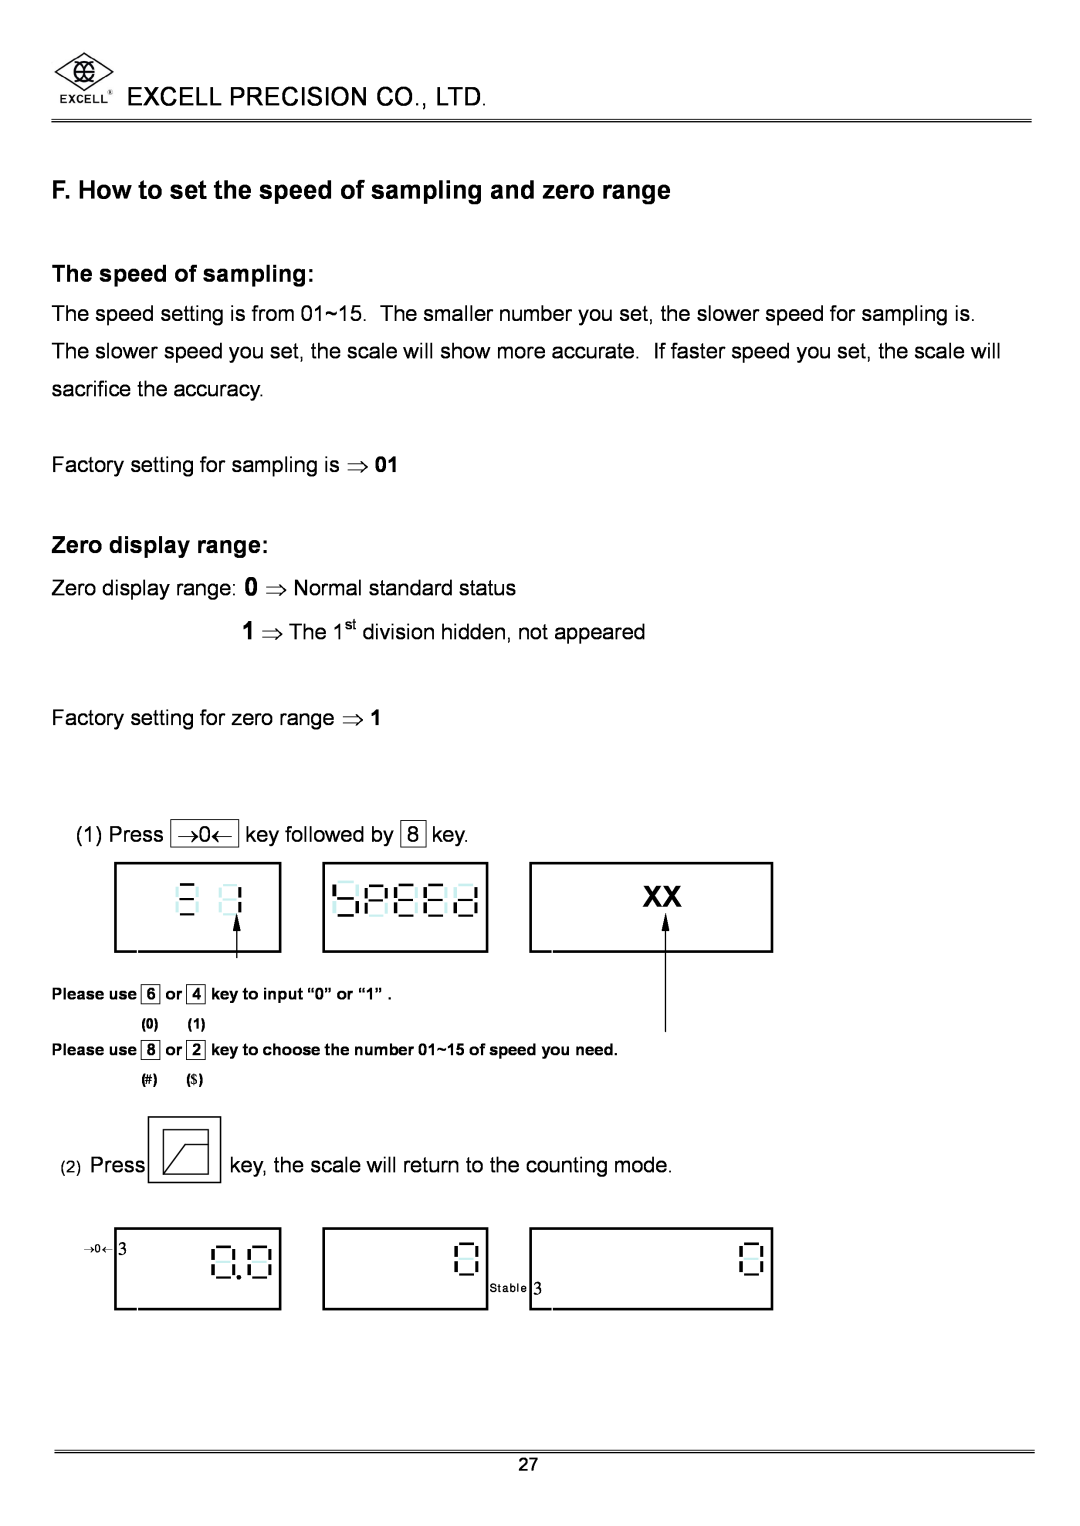 Excell Precision High Precesion Counting Scale F. How to set the speed of sampling and zero range, The speed of sampling 